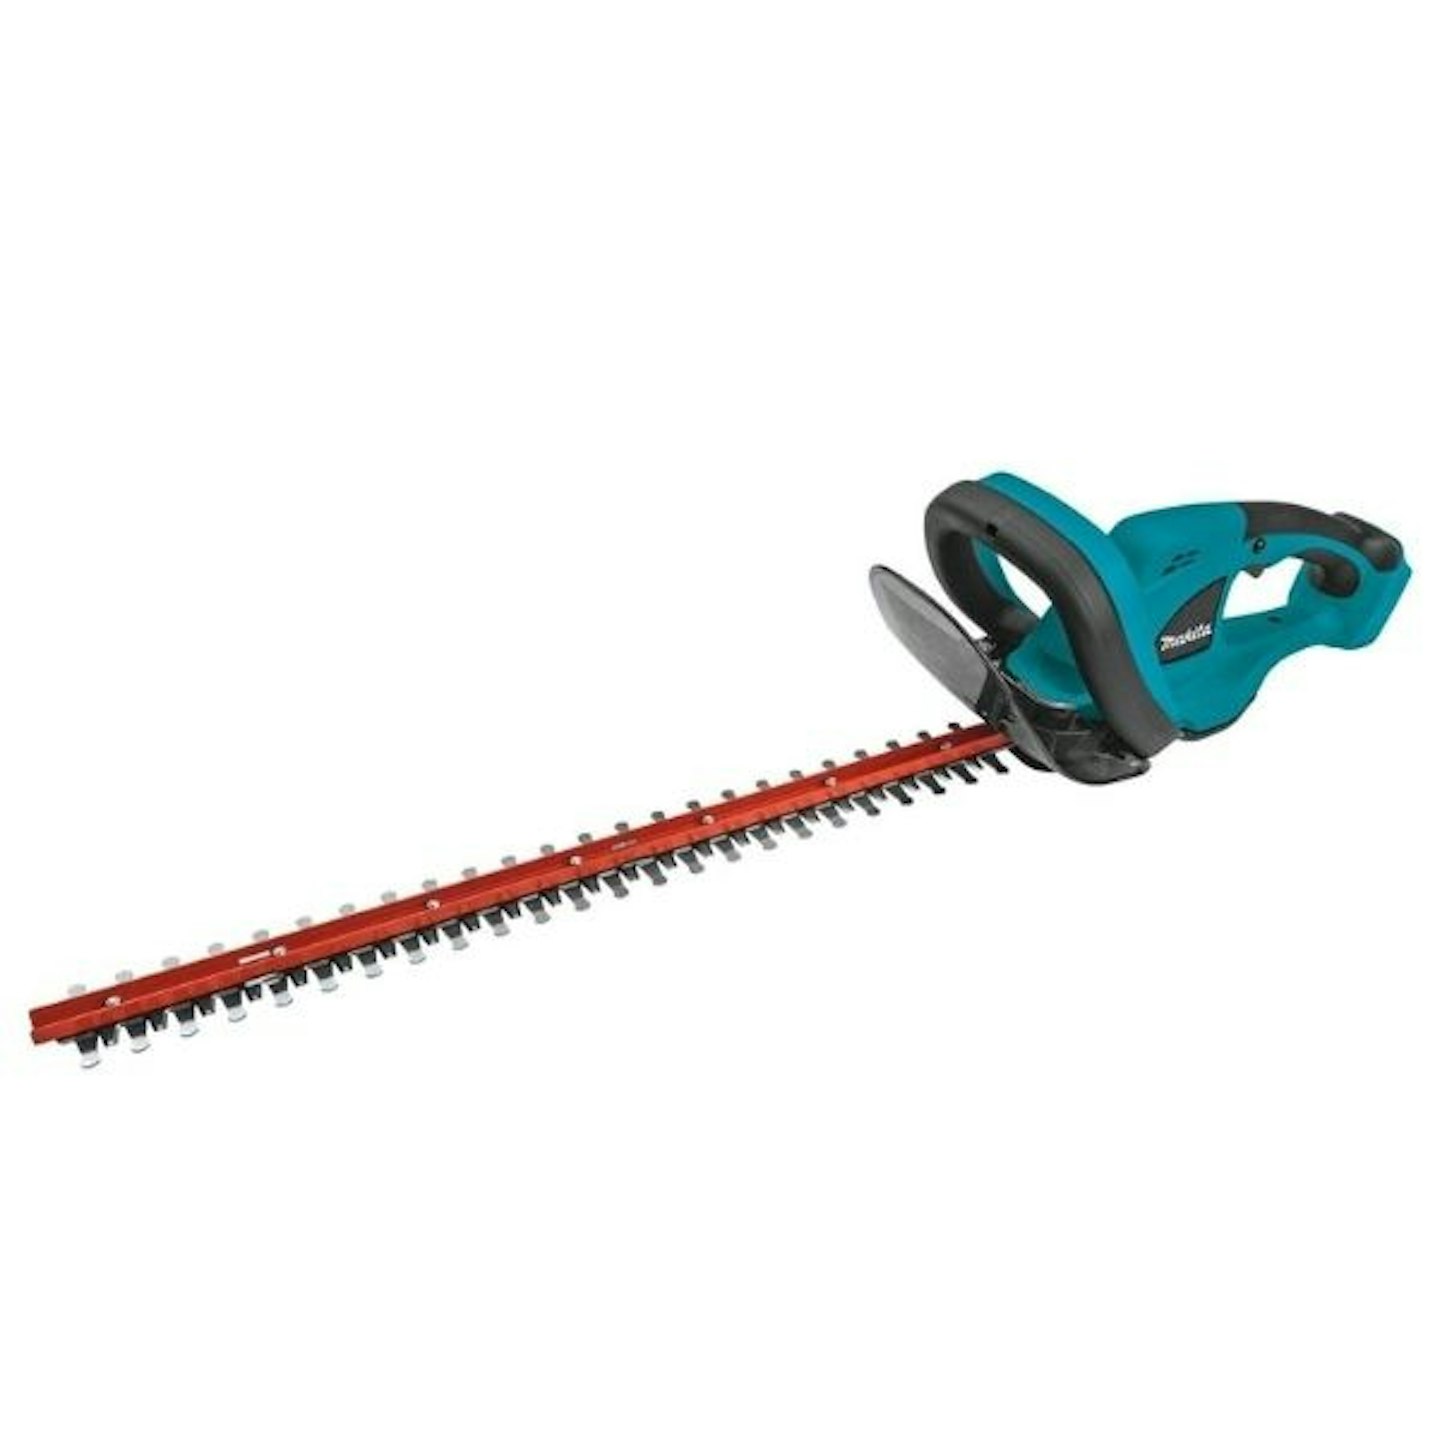 Makita DUH523Z Cordless LXT Lithium-Ion Hedge Trimmer